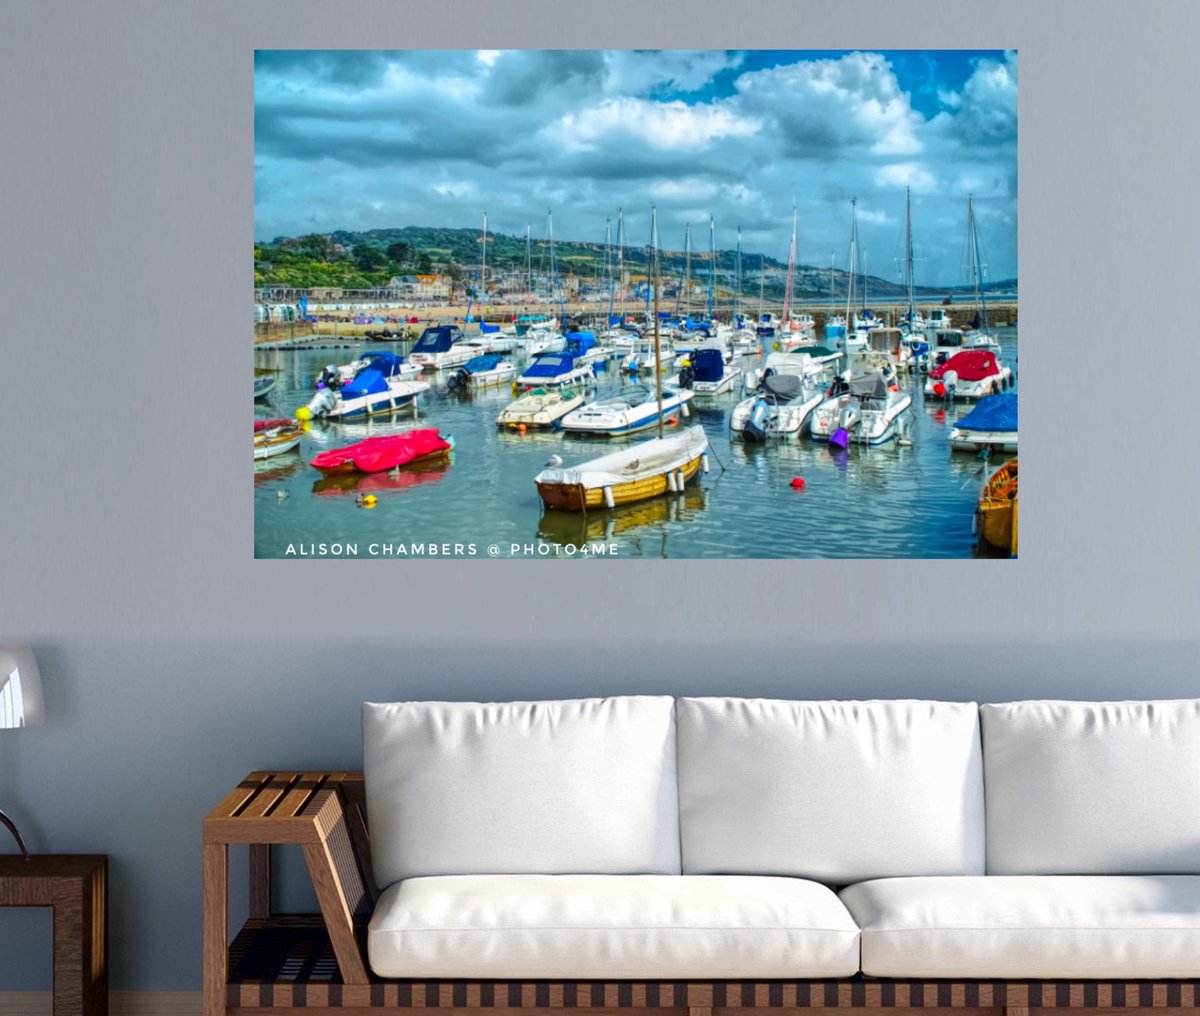 Lyme Regis Harbour©️. Available from; shop.photo4me.com/1318427 & alisonchambers2.redbubble.com & 2-alison-chambers.pixels.com #lymeregis #lymeregisdorset #lymeregisharbour #thecobblymeregis #dorsetcoast #dorset #ukwallart